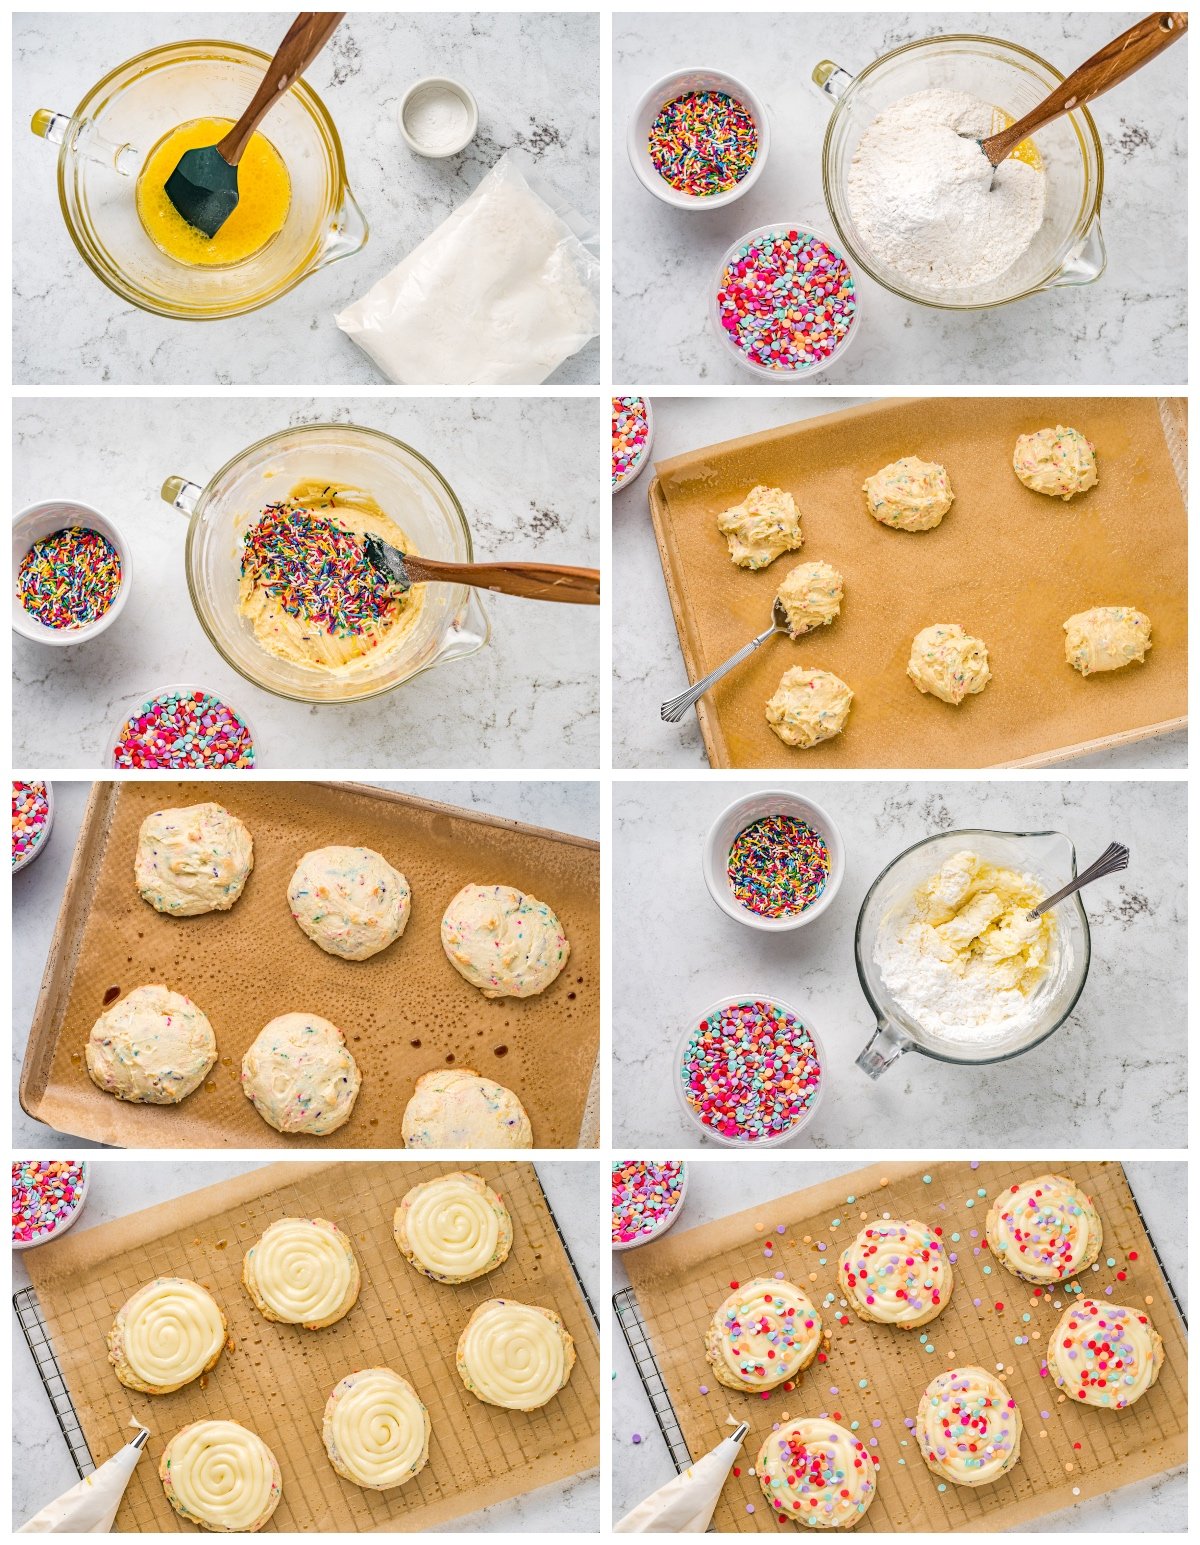 how to make confetti cake cookies step by step photo instructions